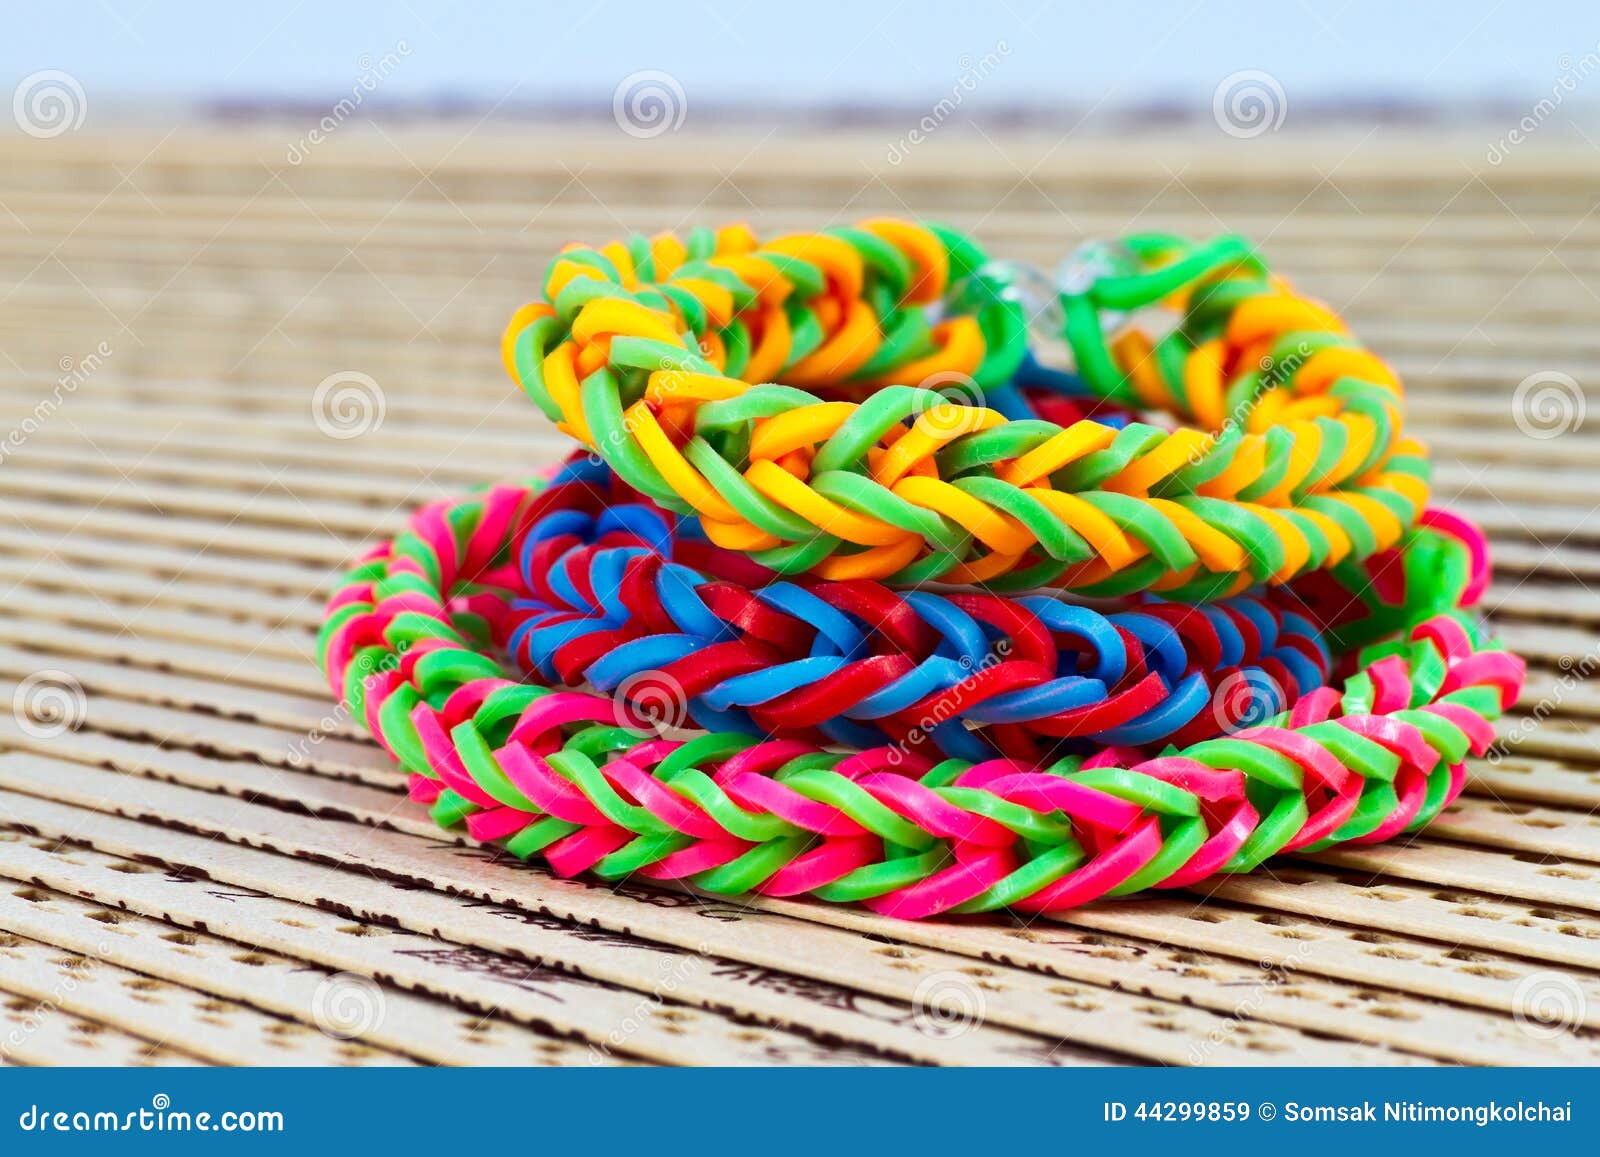 Loom bands: Doctors warn parents about the risks of popular toy at  Christmas | The Independent | The Independent